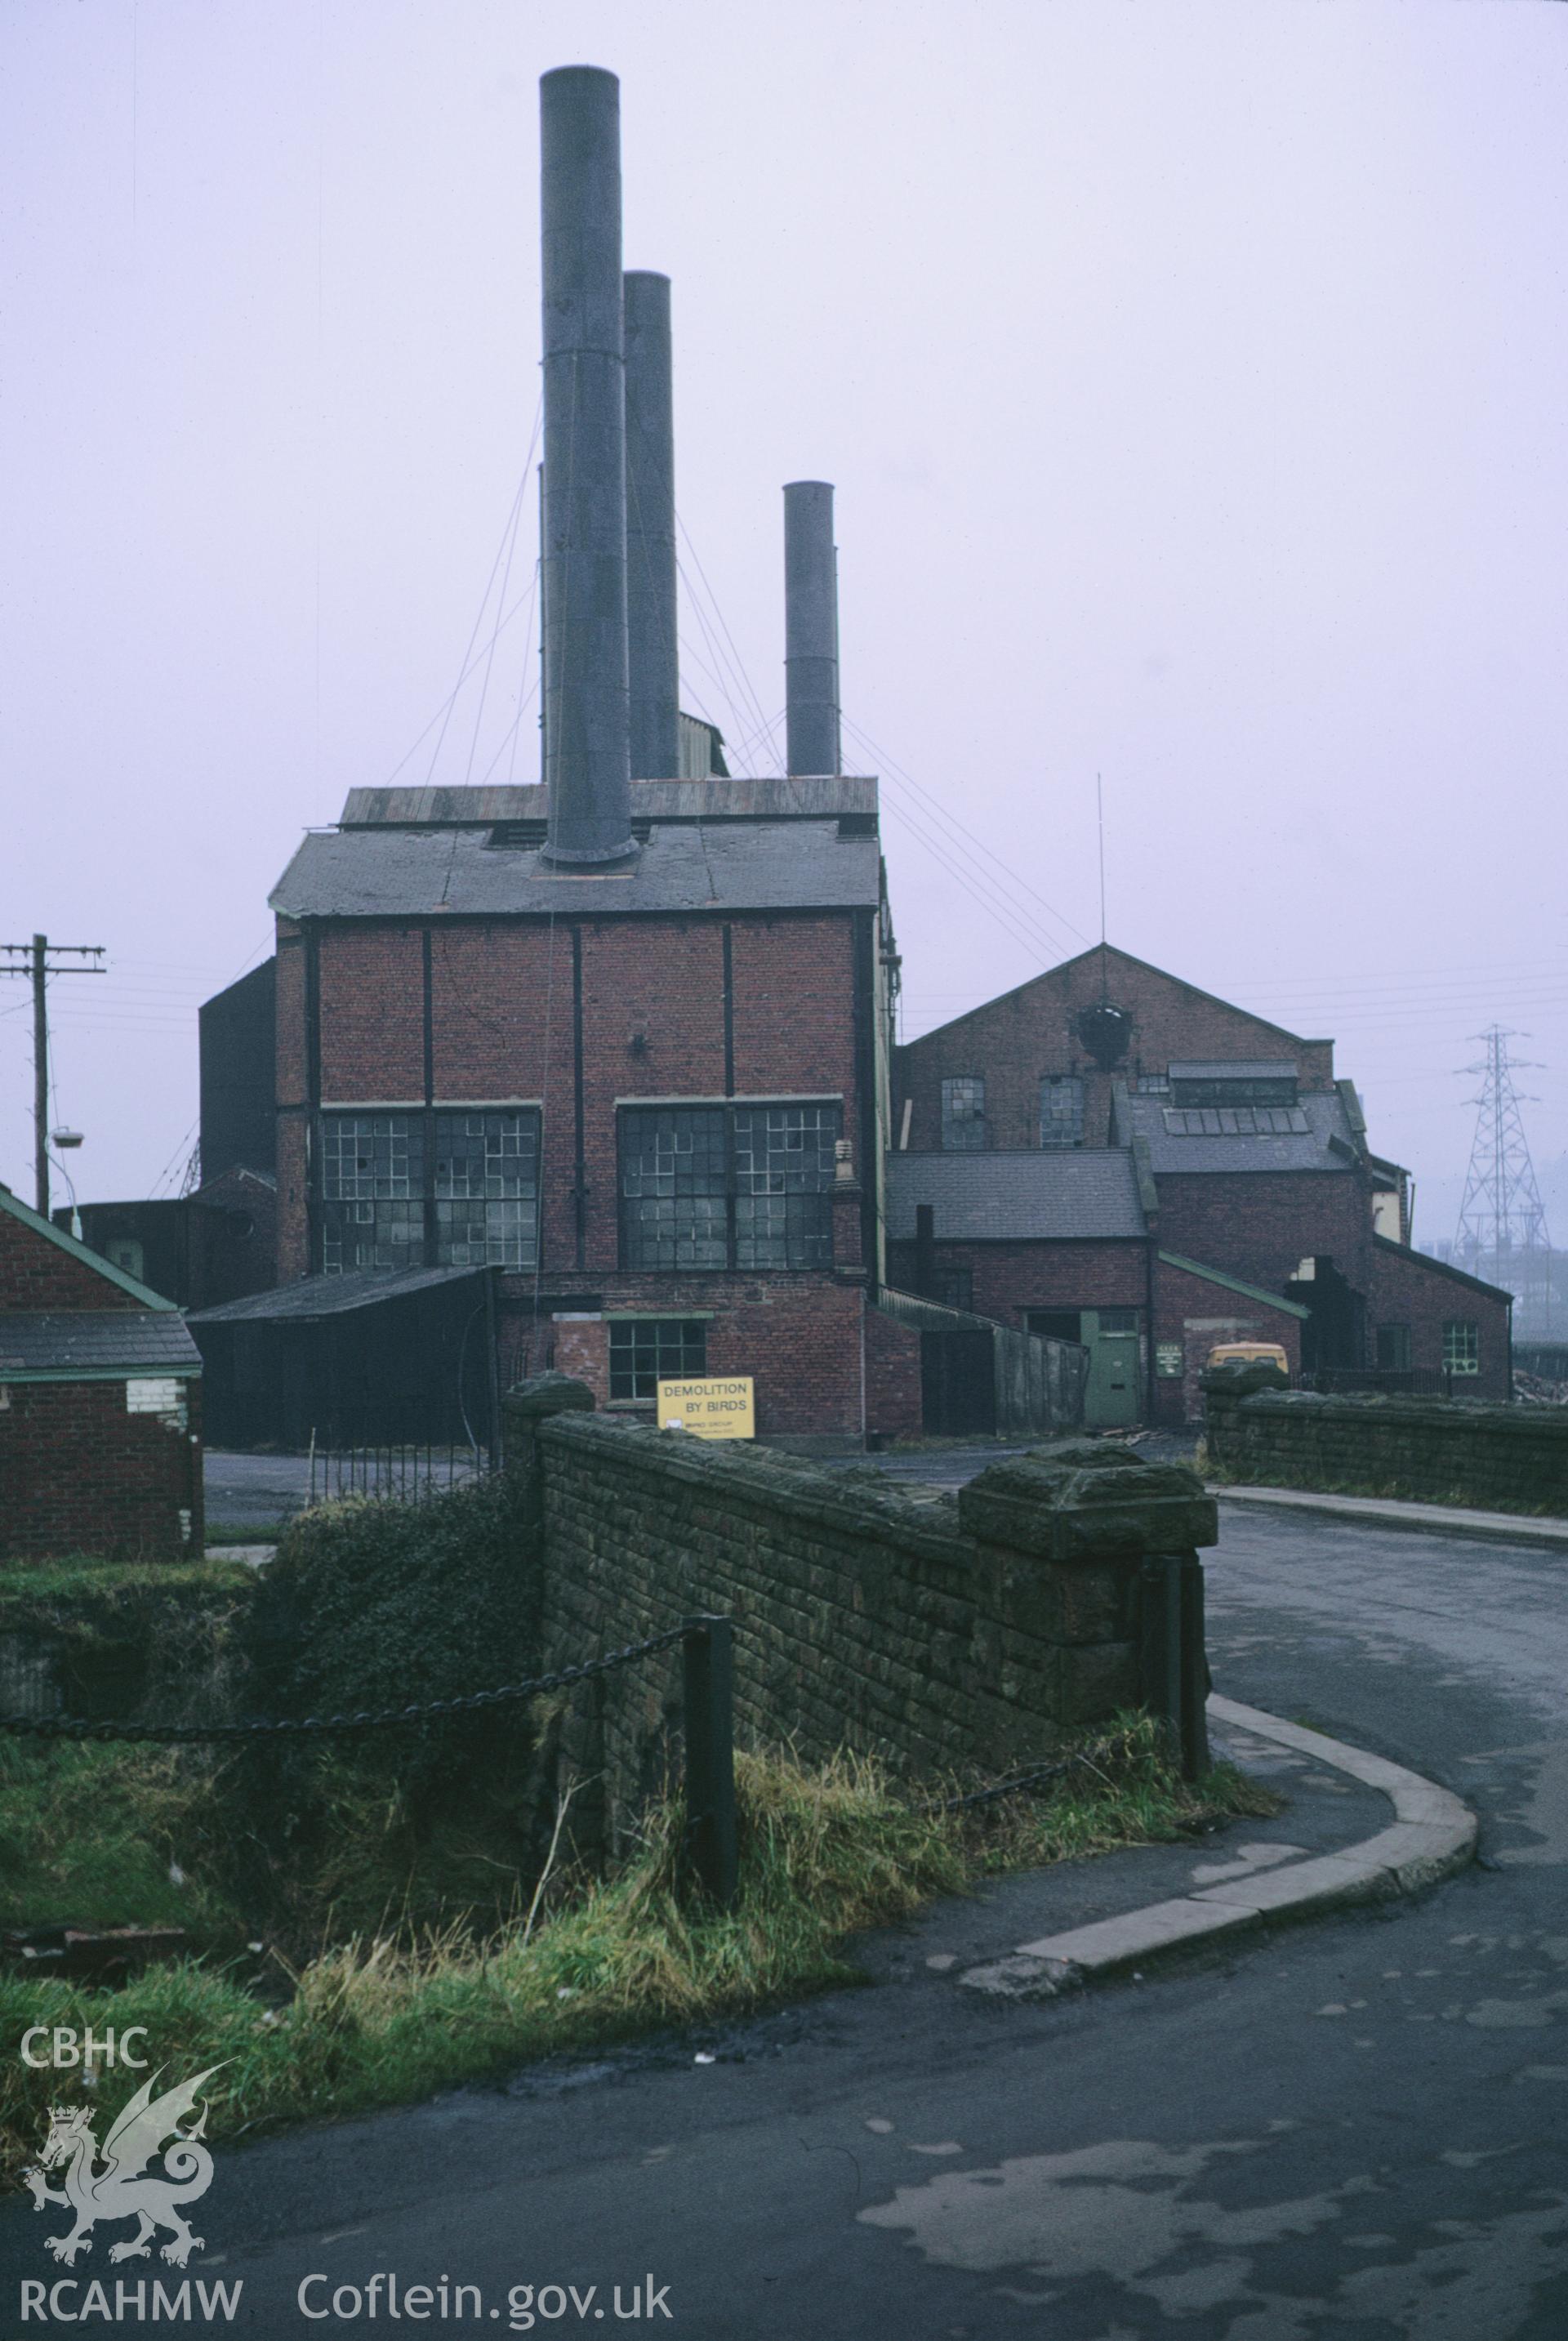 35mm colour slide of Llanelli Power Station, Llanelli, Carmarthenshire, by Dylan Roberts.